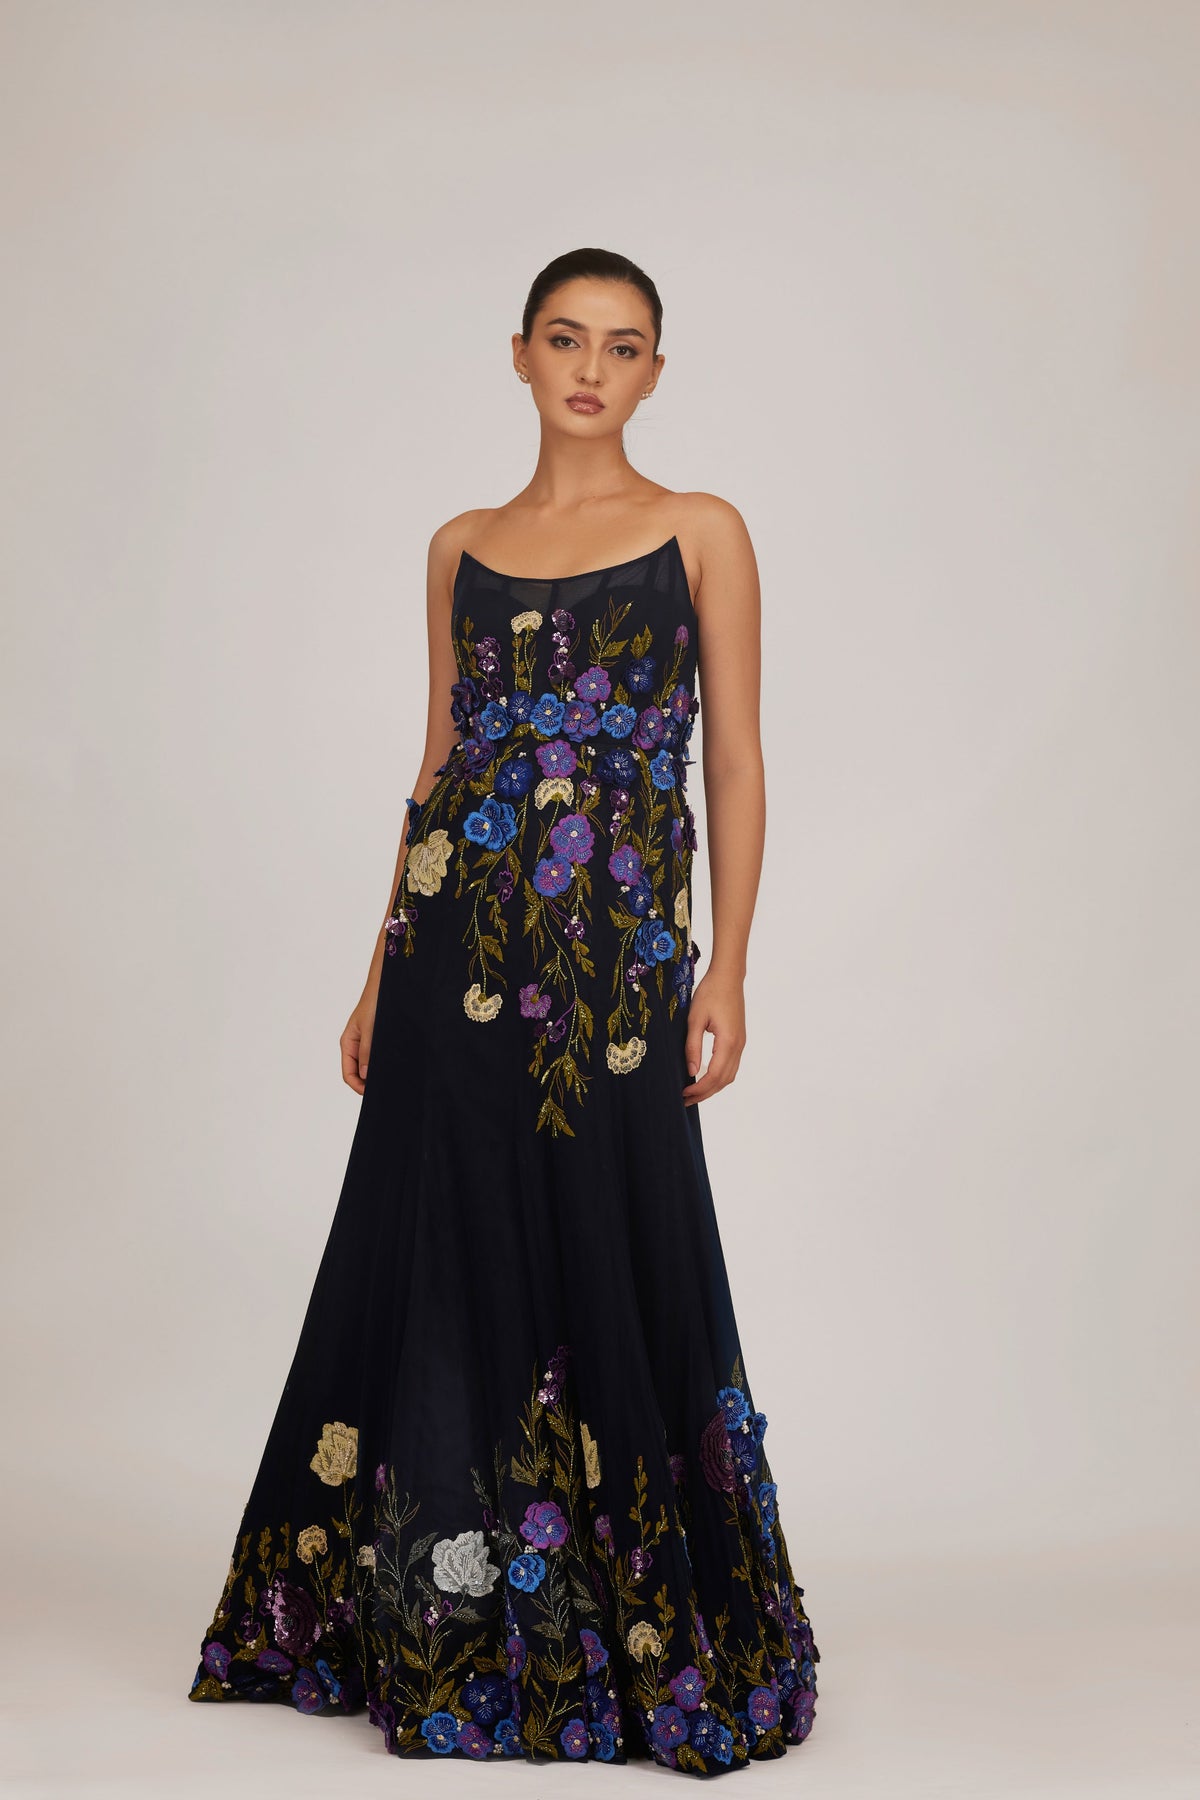 Floral Embellished Fishtail Gown